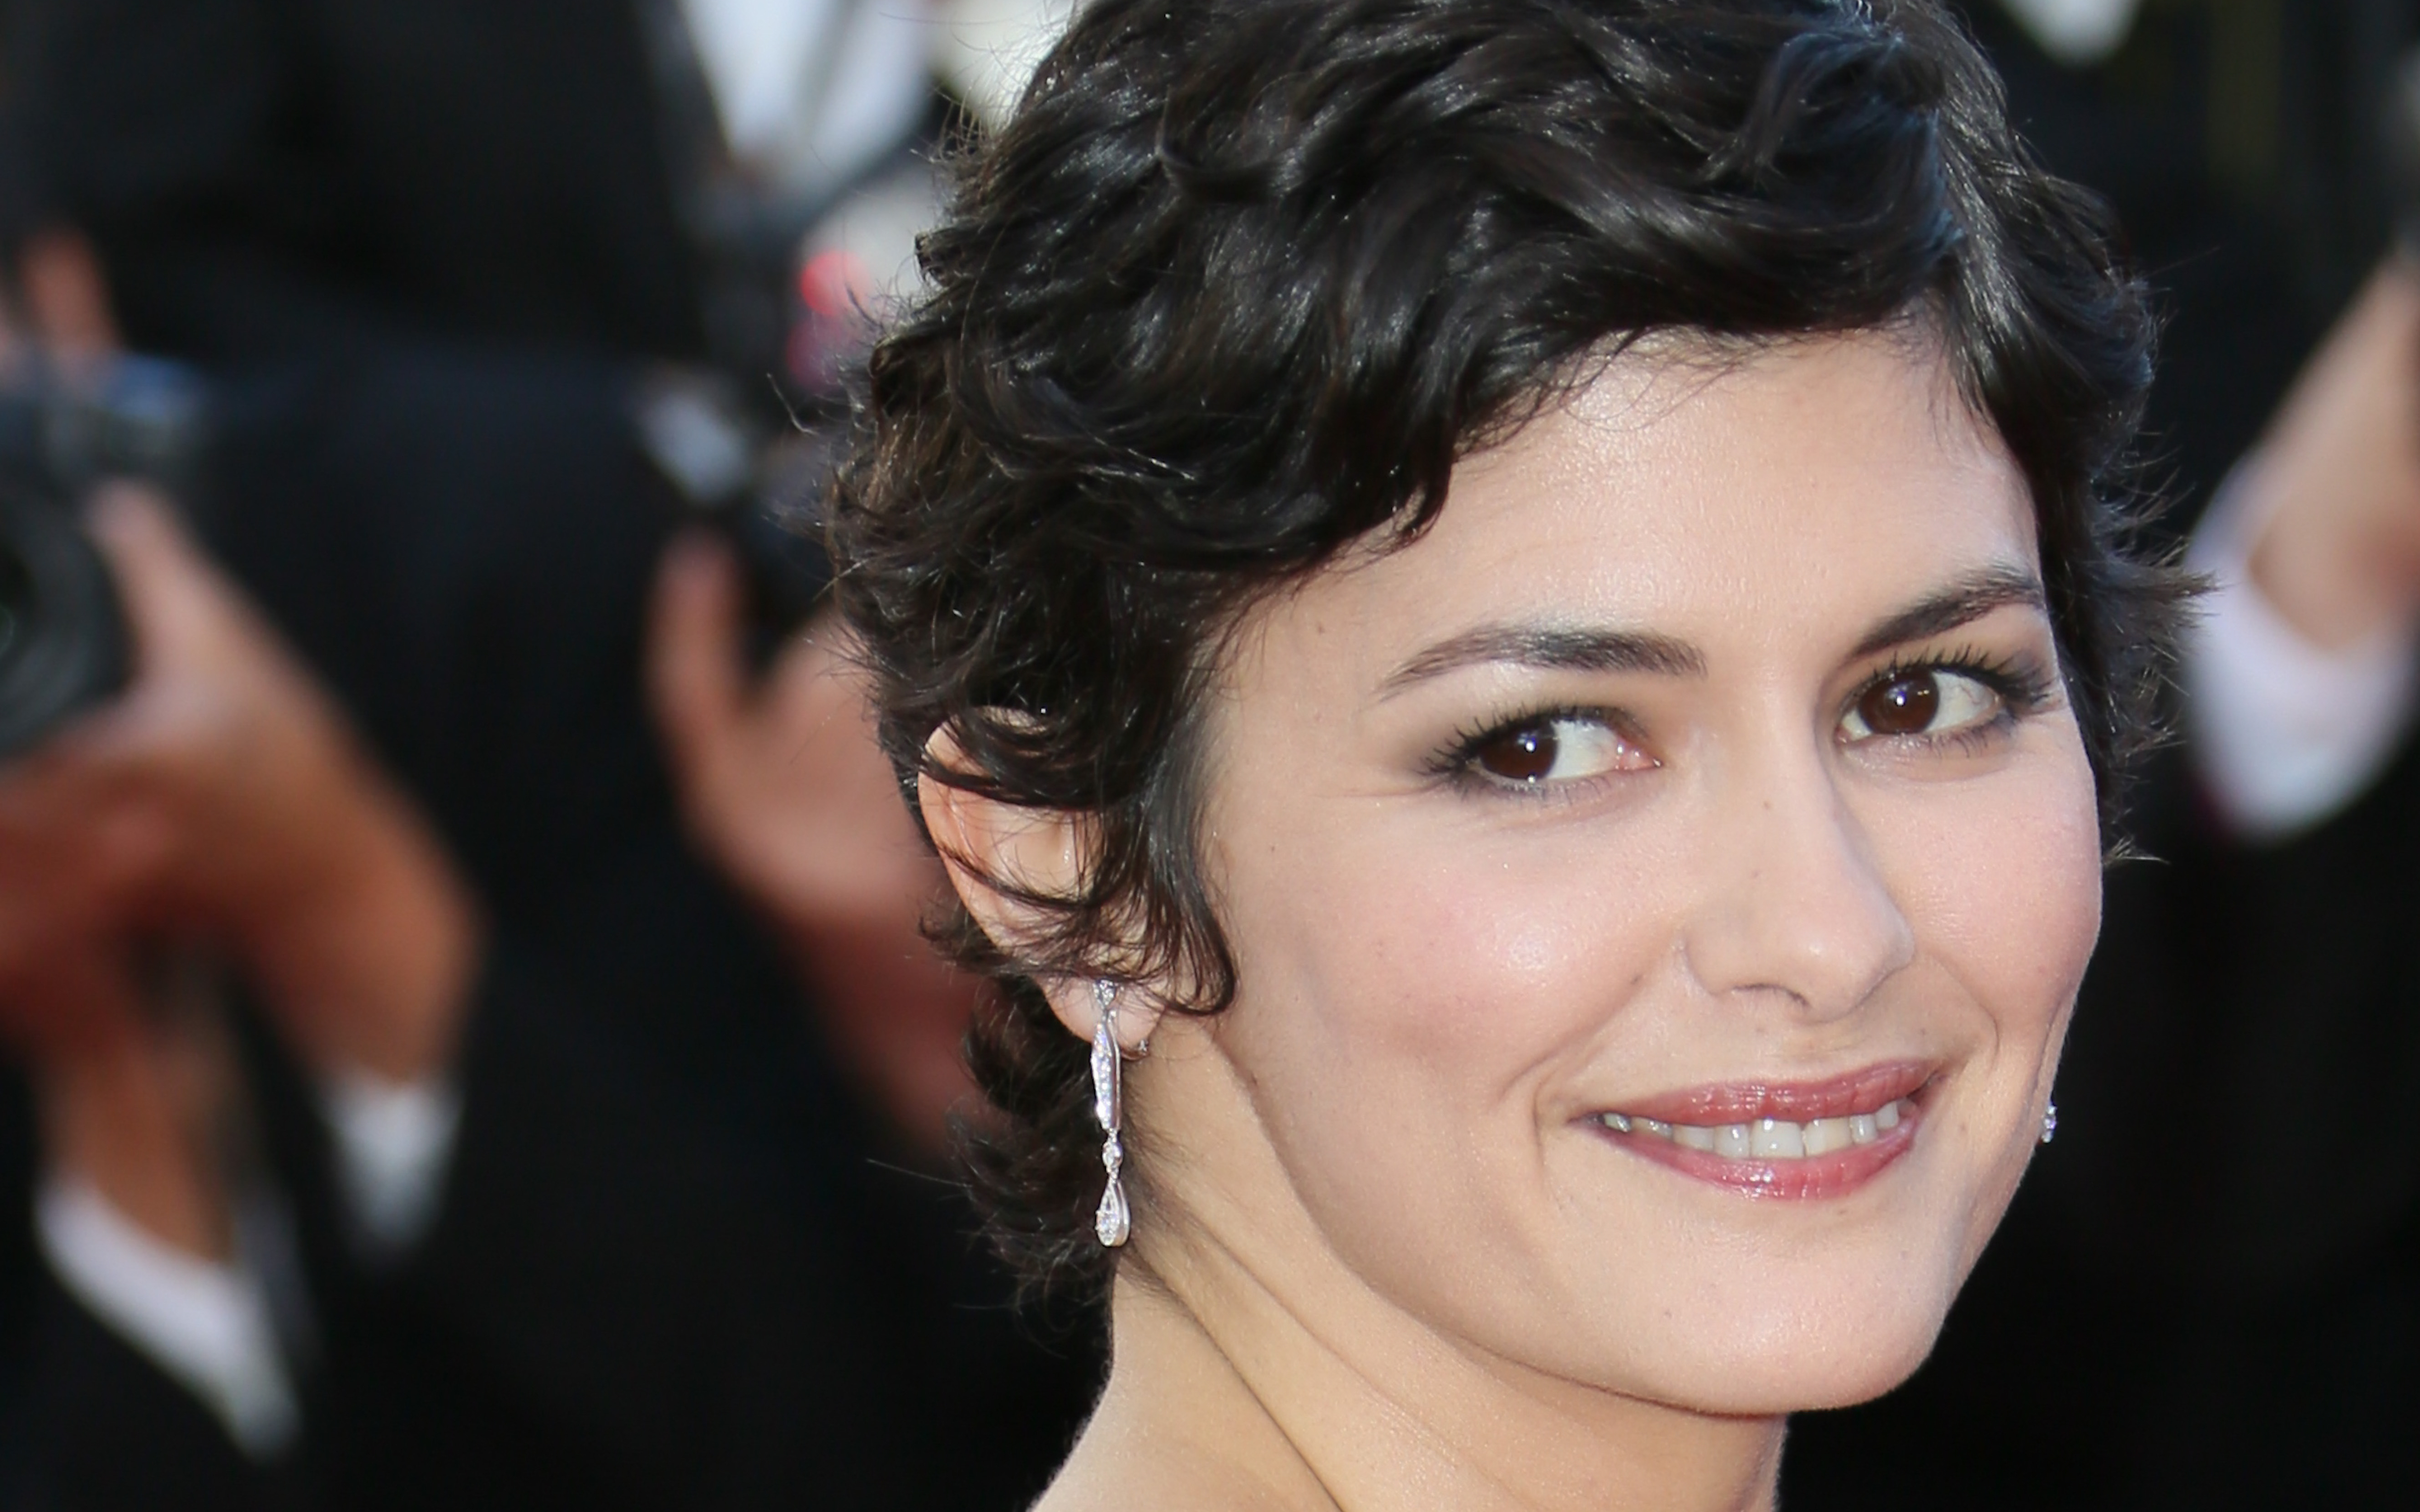 Audrey Tautou In Boy Cut Hair Style Hd Wallpaper Wallpaper, HD Celebrities  4K Wallpapers, Images, Photos and Background - Wallpapers Den